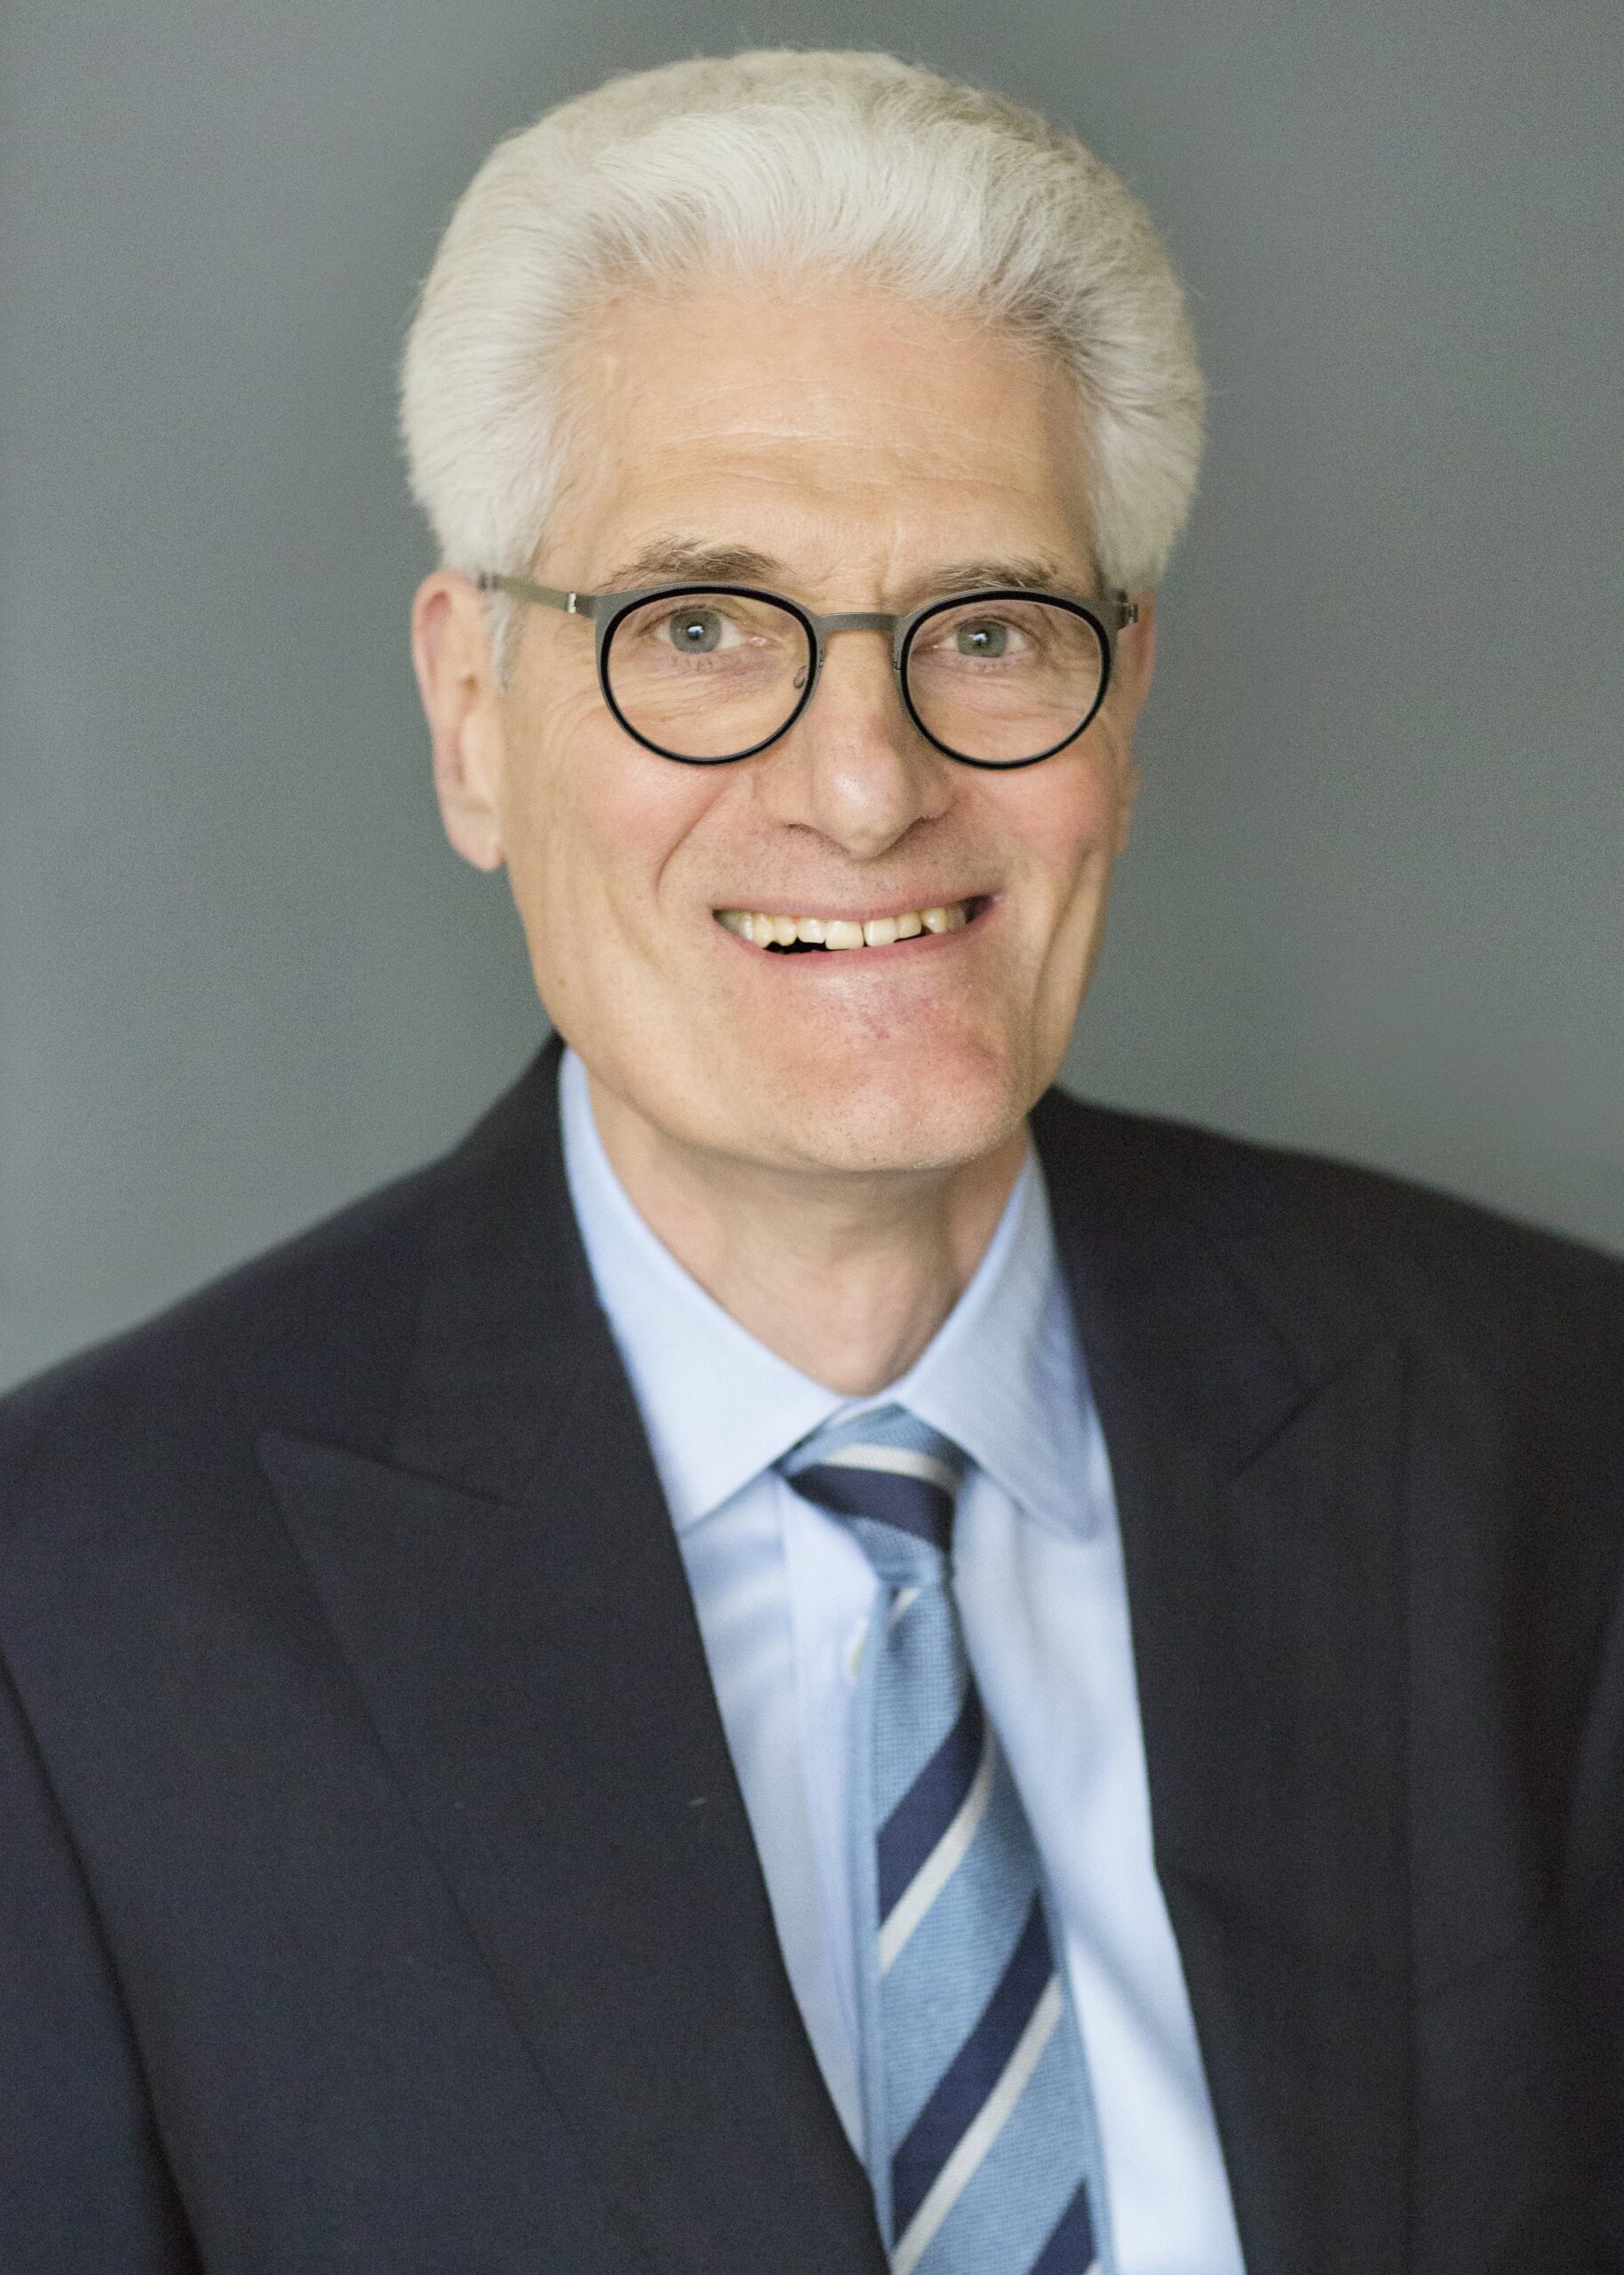 A professional portrait of a smiling senior man with silver hair, wearing glasses, a blue suit, a light blue shirt, and a striped tie.